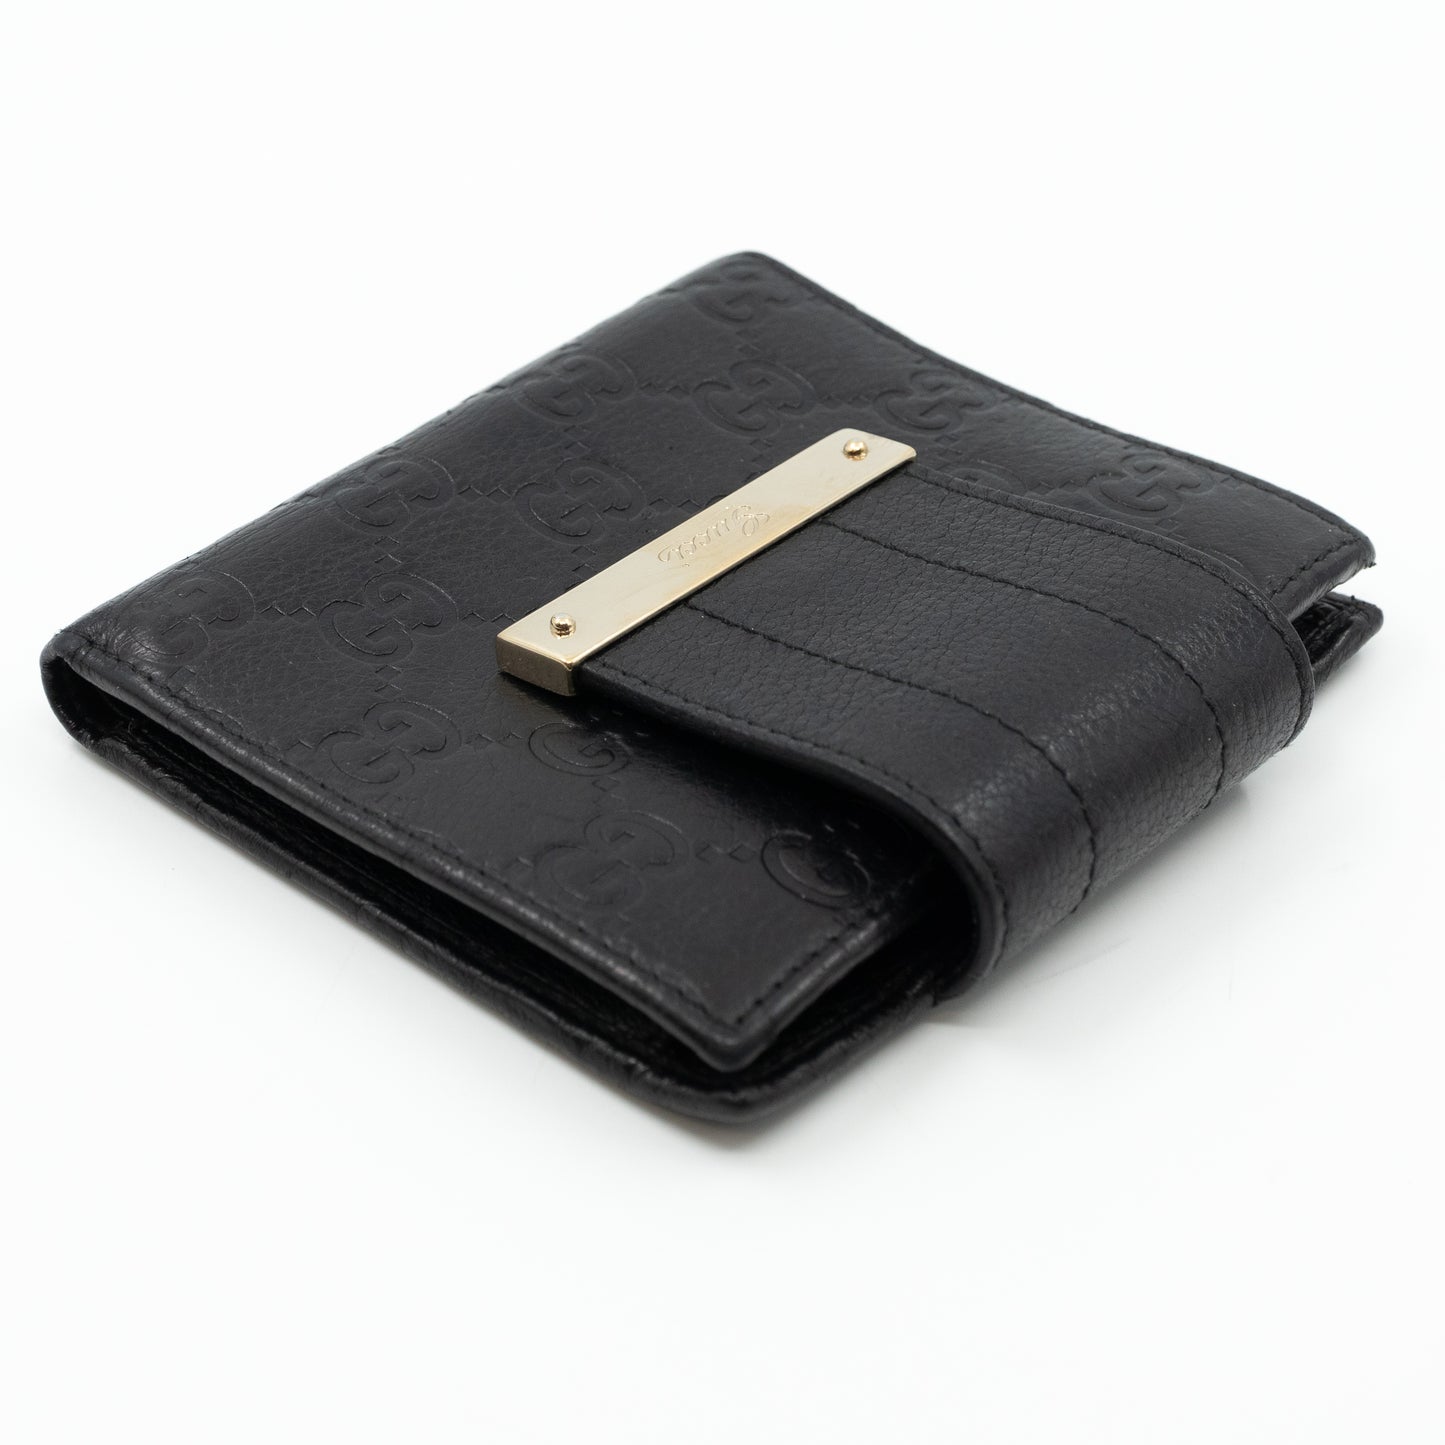 Compact Flap Wallet Black Leather